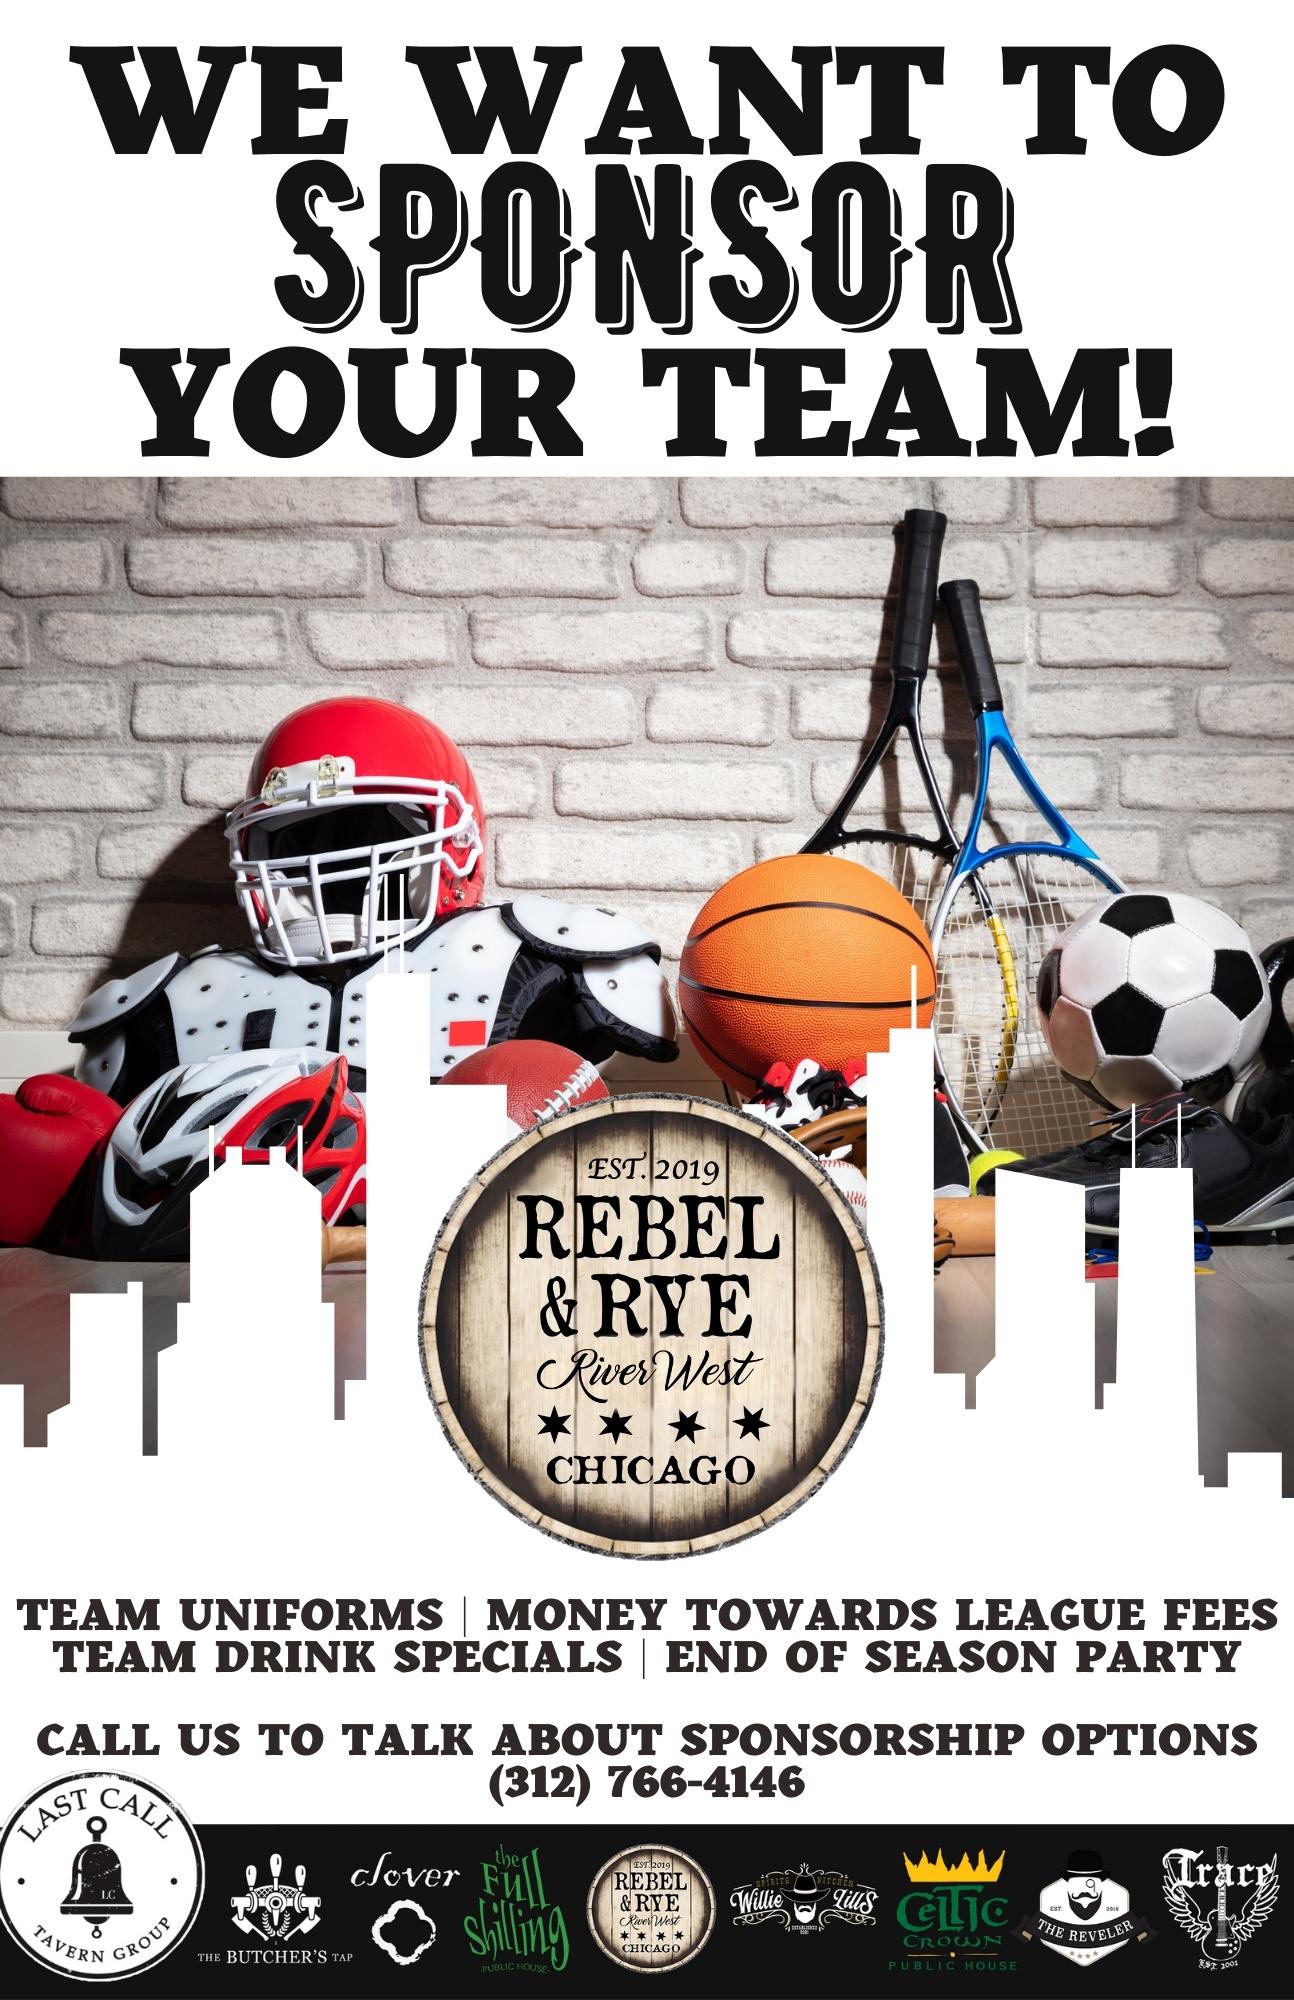 We Want To Sponsor Your Team!-Rebel & Rye